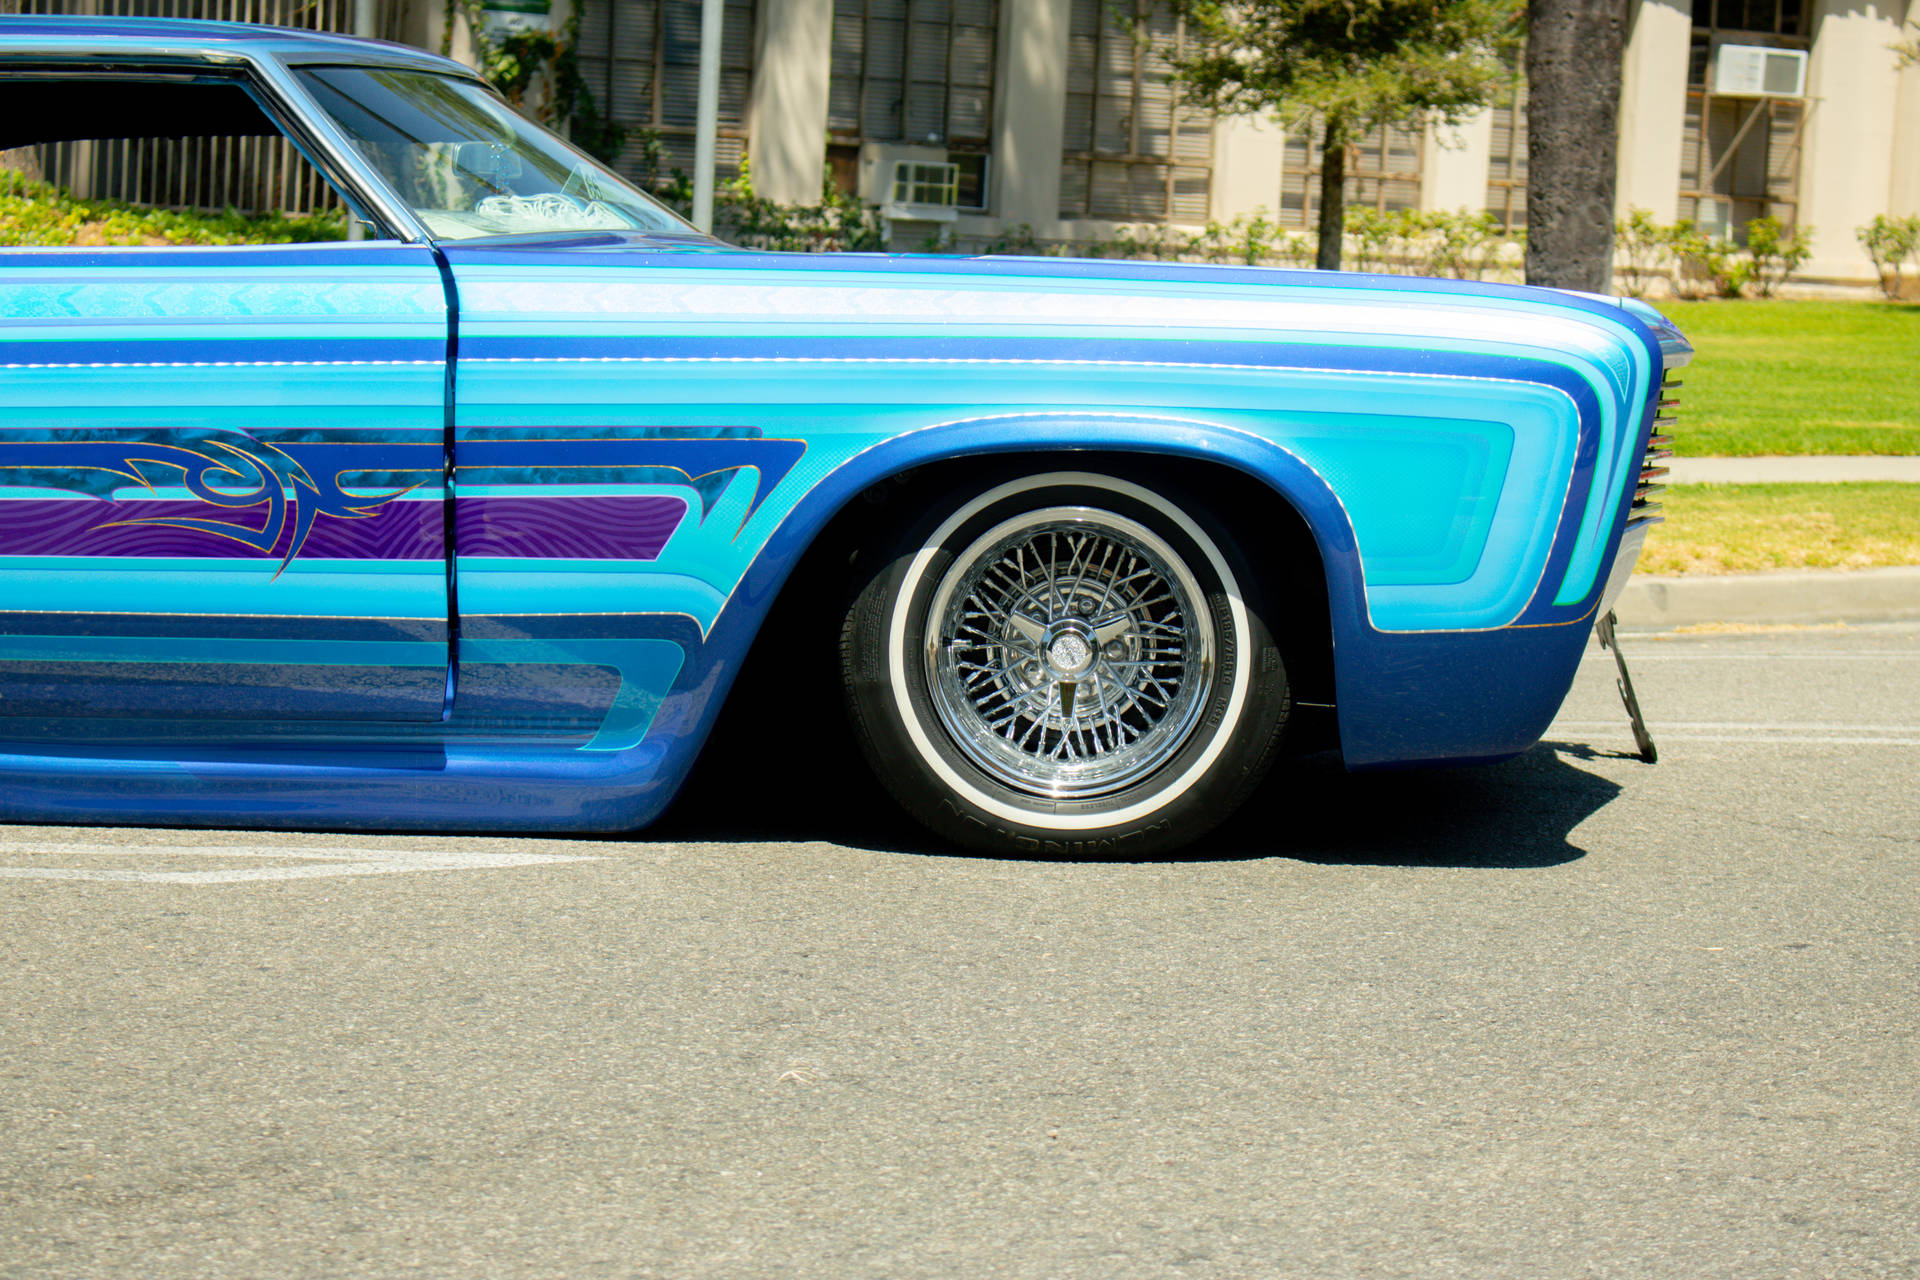 Lowrider Impala With Blue Violet Decals Wallpaper